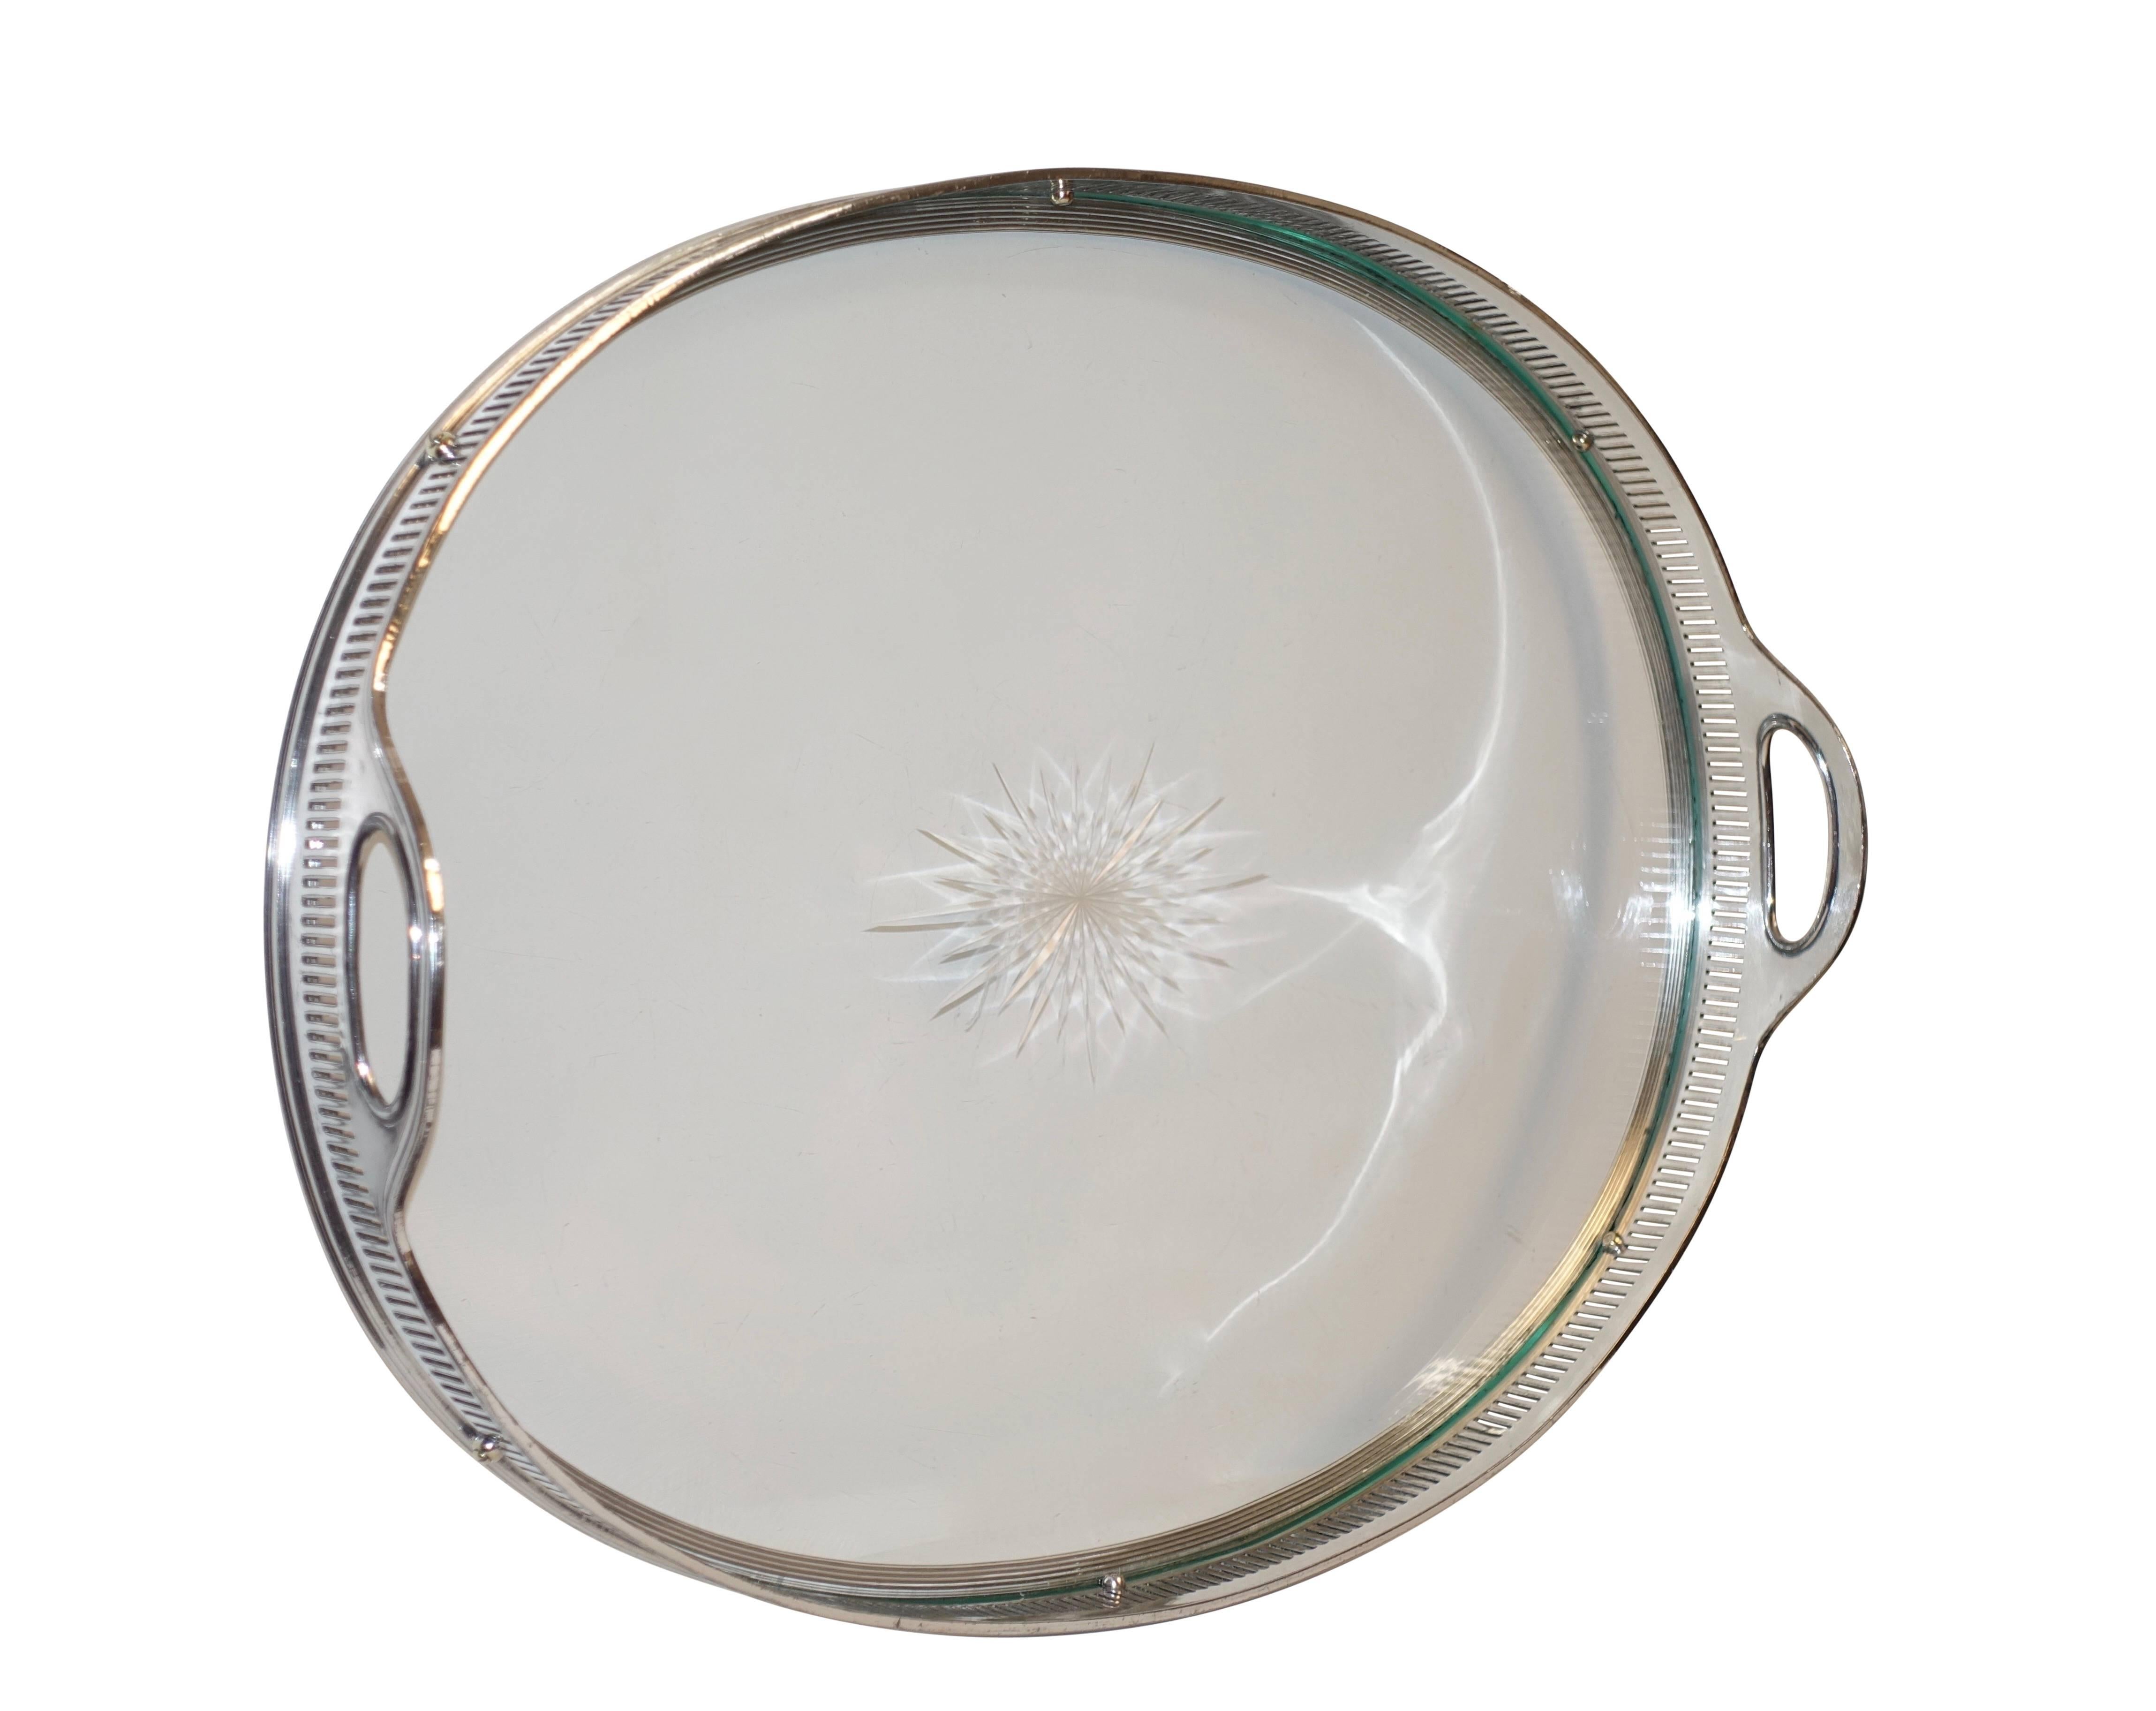 A Meridian silver plate oval shape tray with cut-glass bottom, American, mid-20th century.